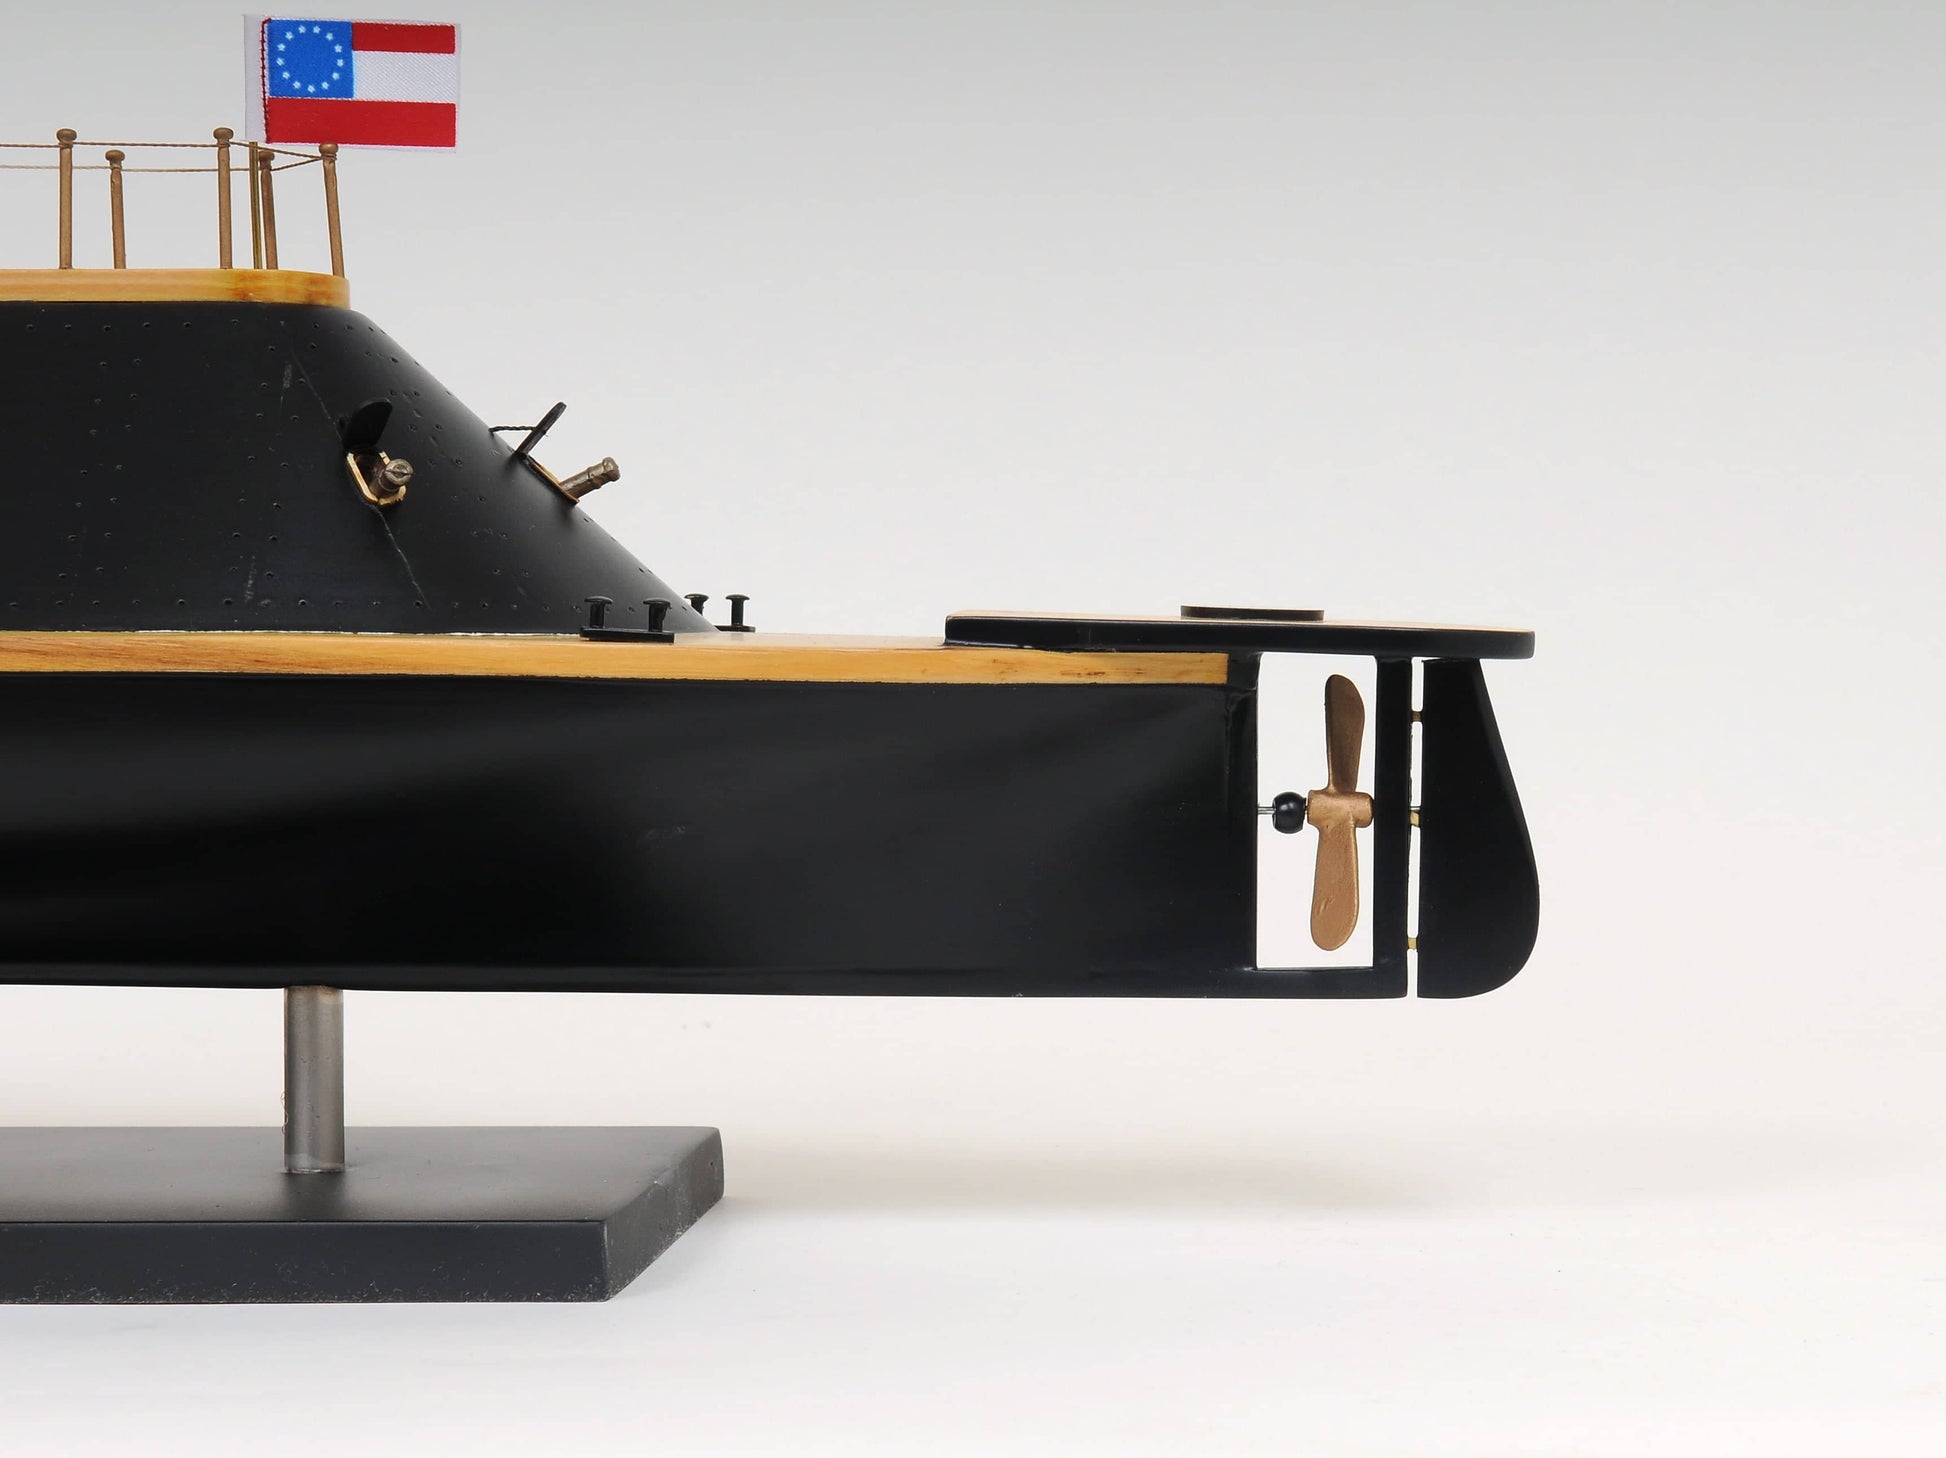 ALDO Hobbies & Creative Arts > Collectibles > Scale Models L: 38.5 W: 9.5 H: 16 Inches / NEW / wood C.S.S. Virginia Ironclad Steam Powered Ship Exclusive Edition Wood Model  Assembled with Display Case